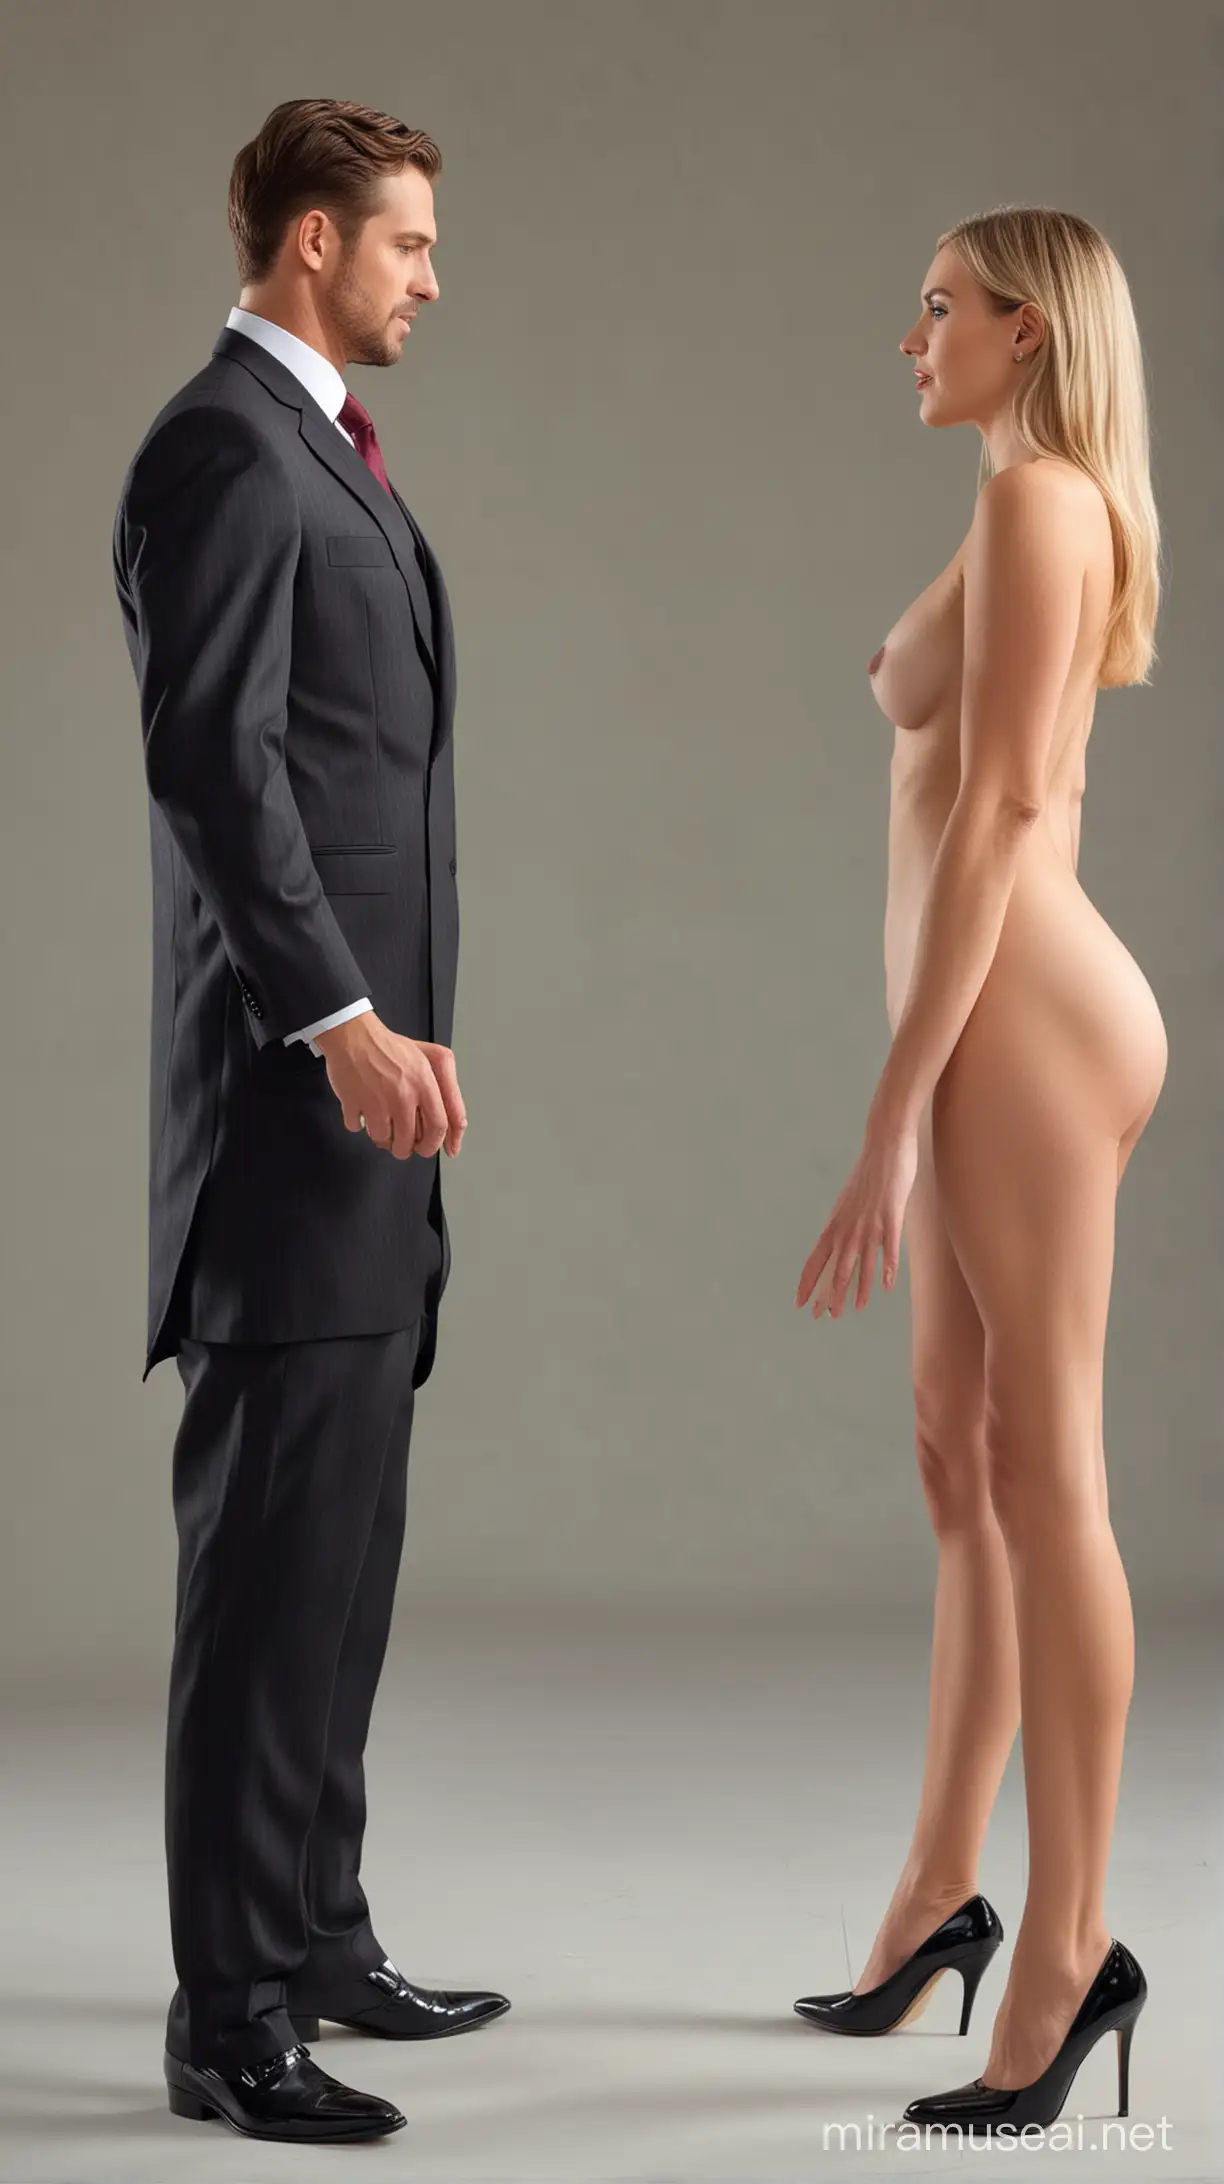 Businessman Discussing with Elegant Woman in High Heels